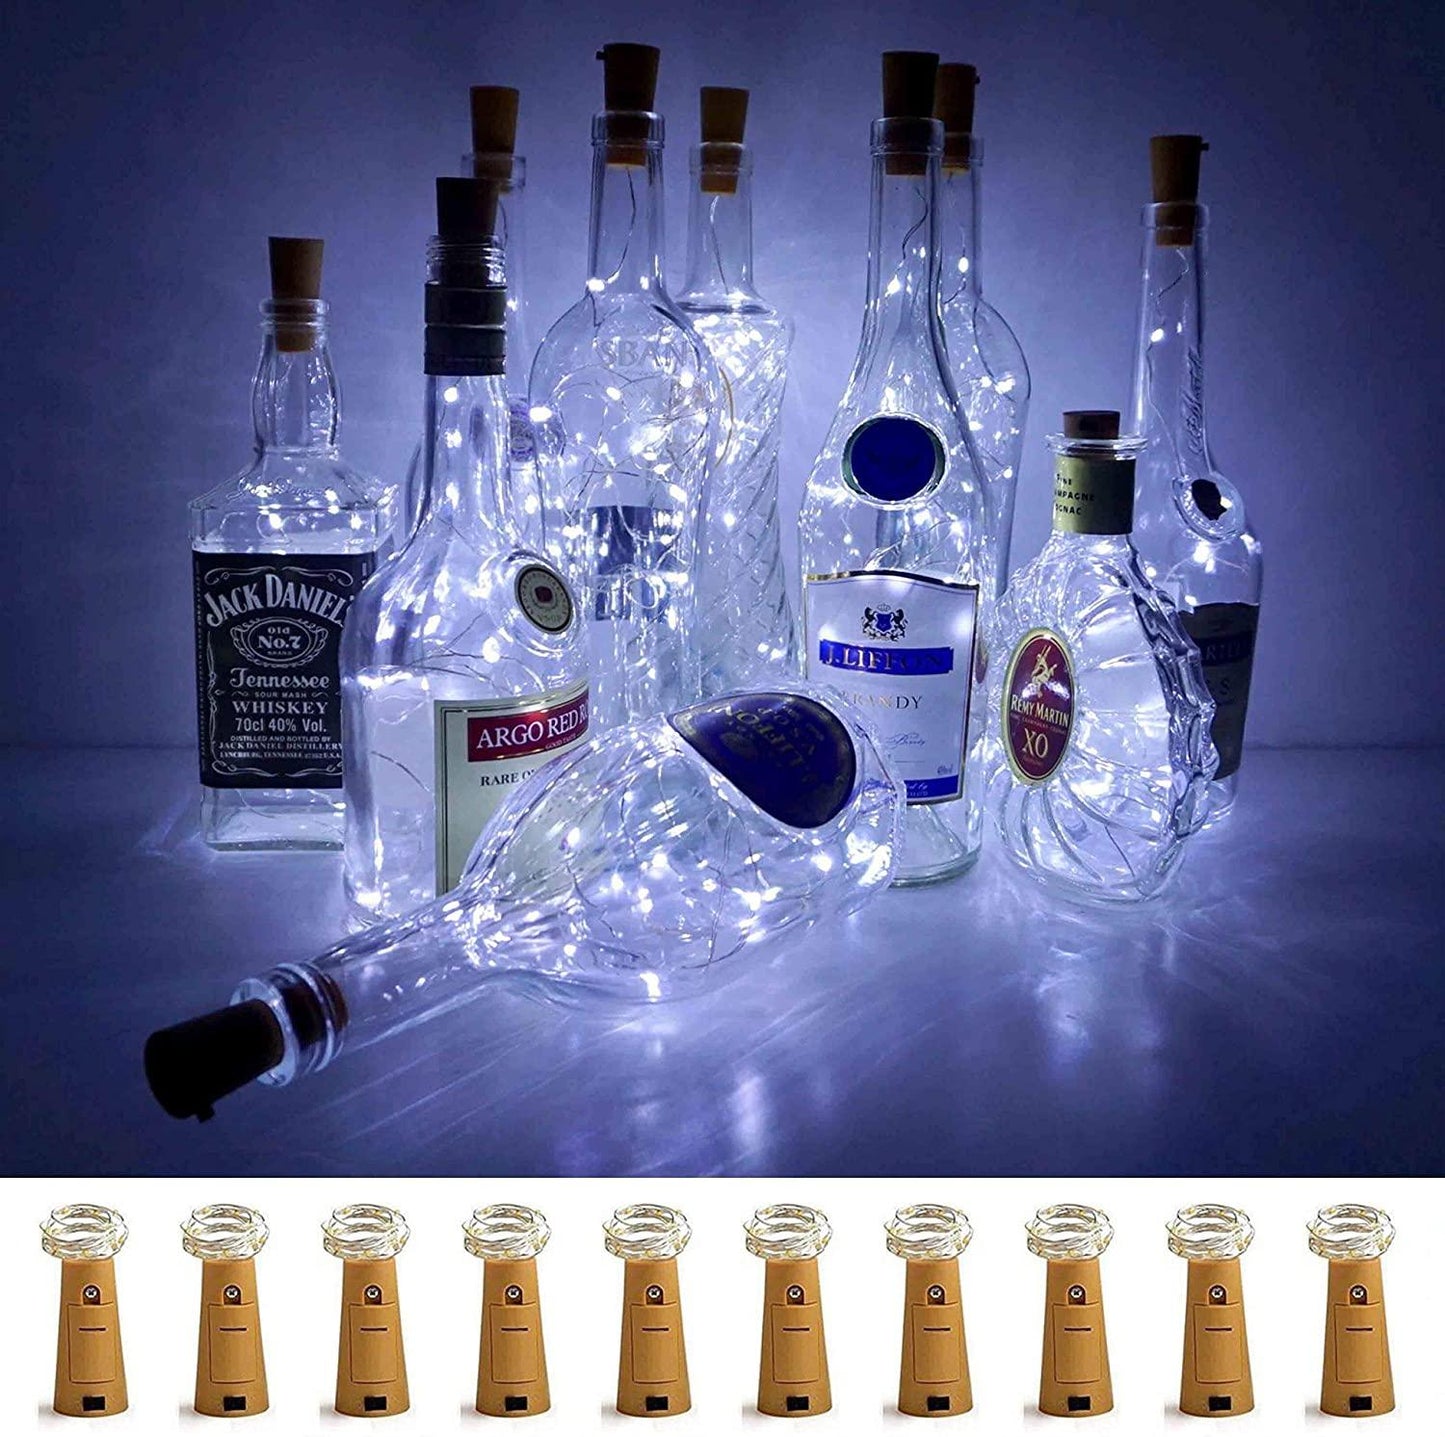 Wine Bottle Lights with Cork for Home Decorations - If you say i do